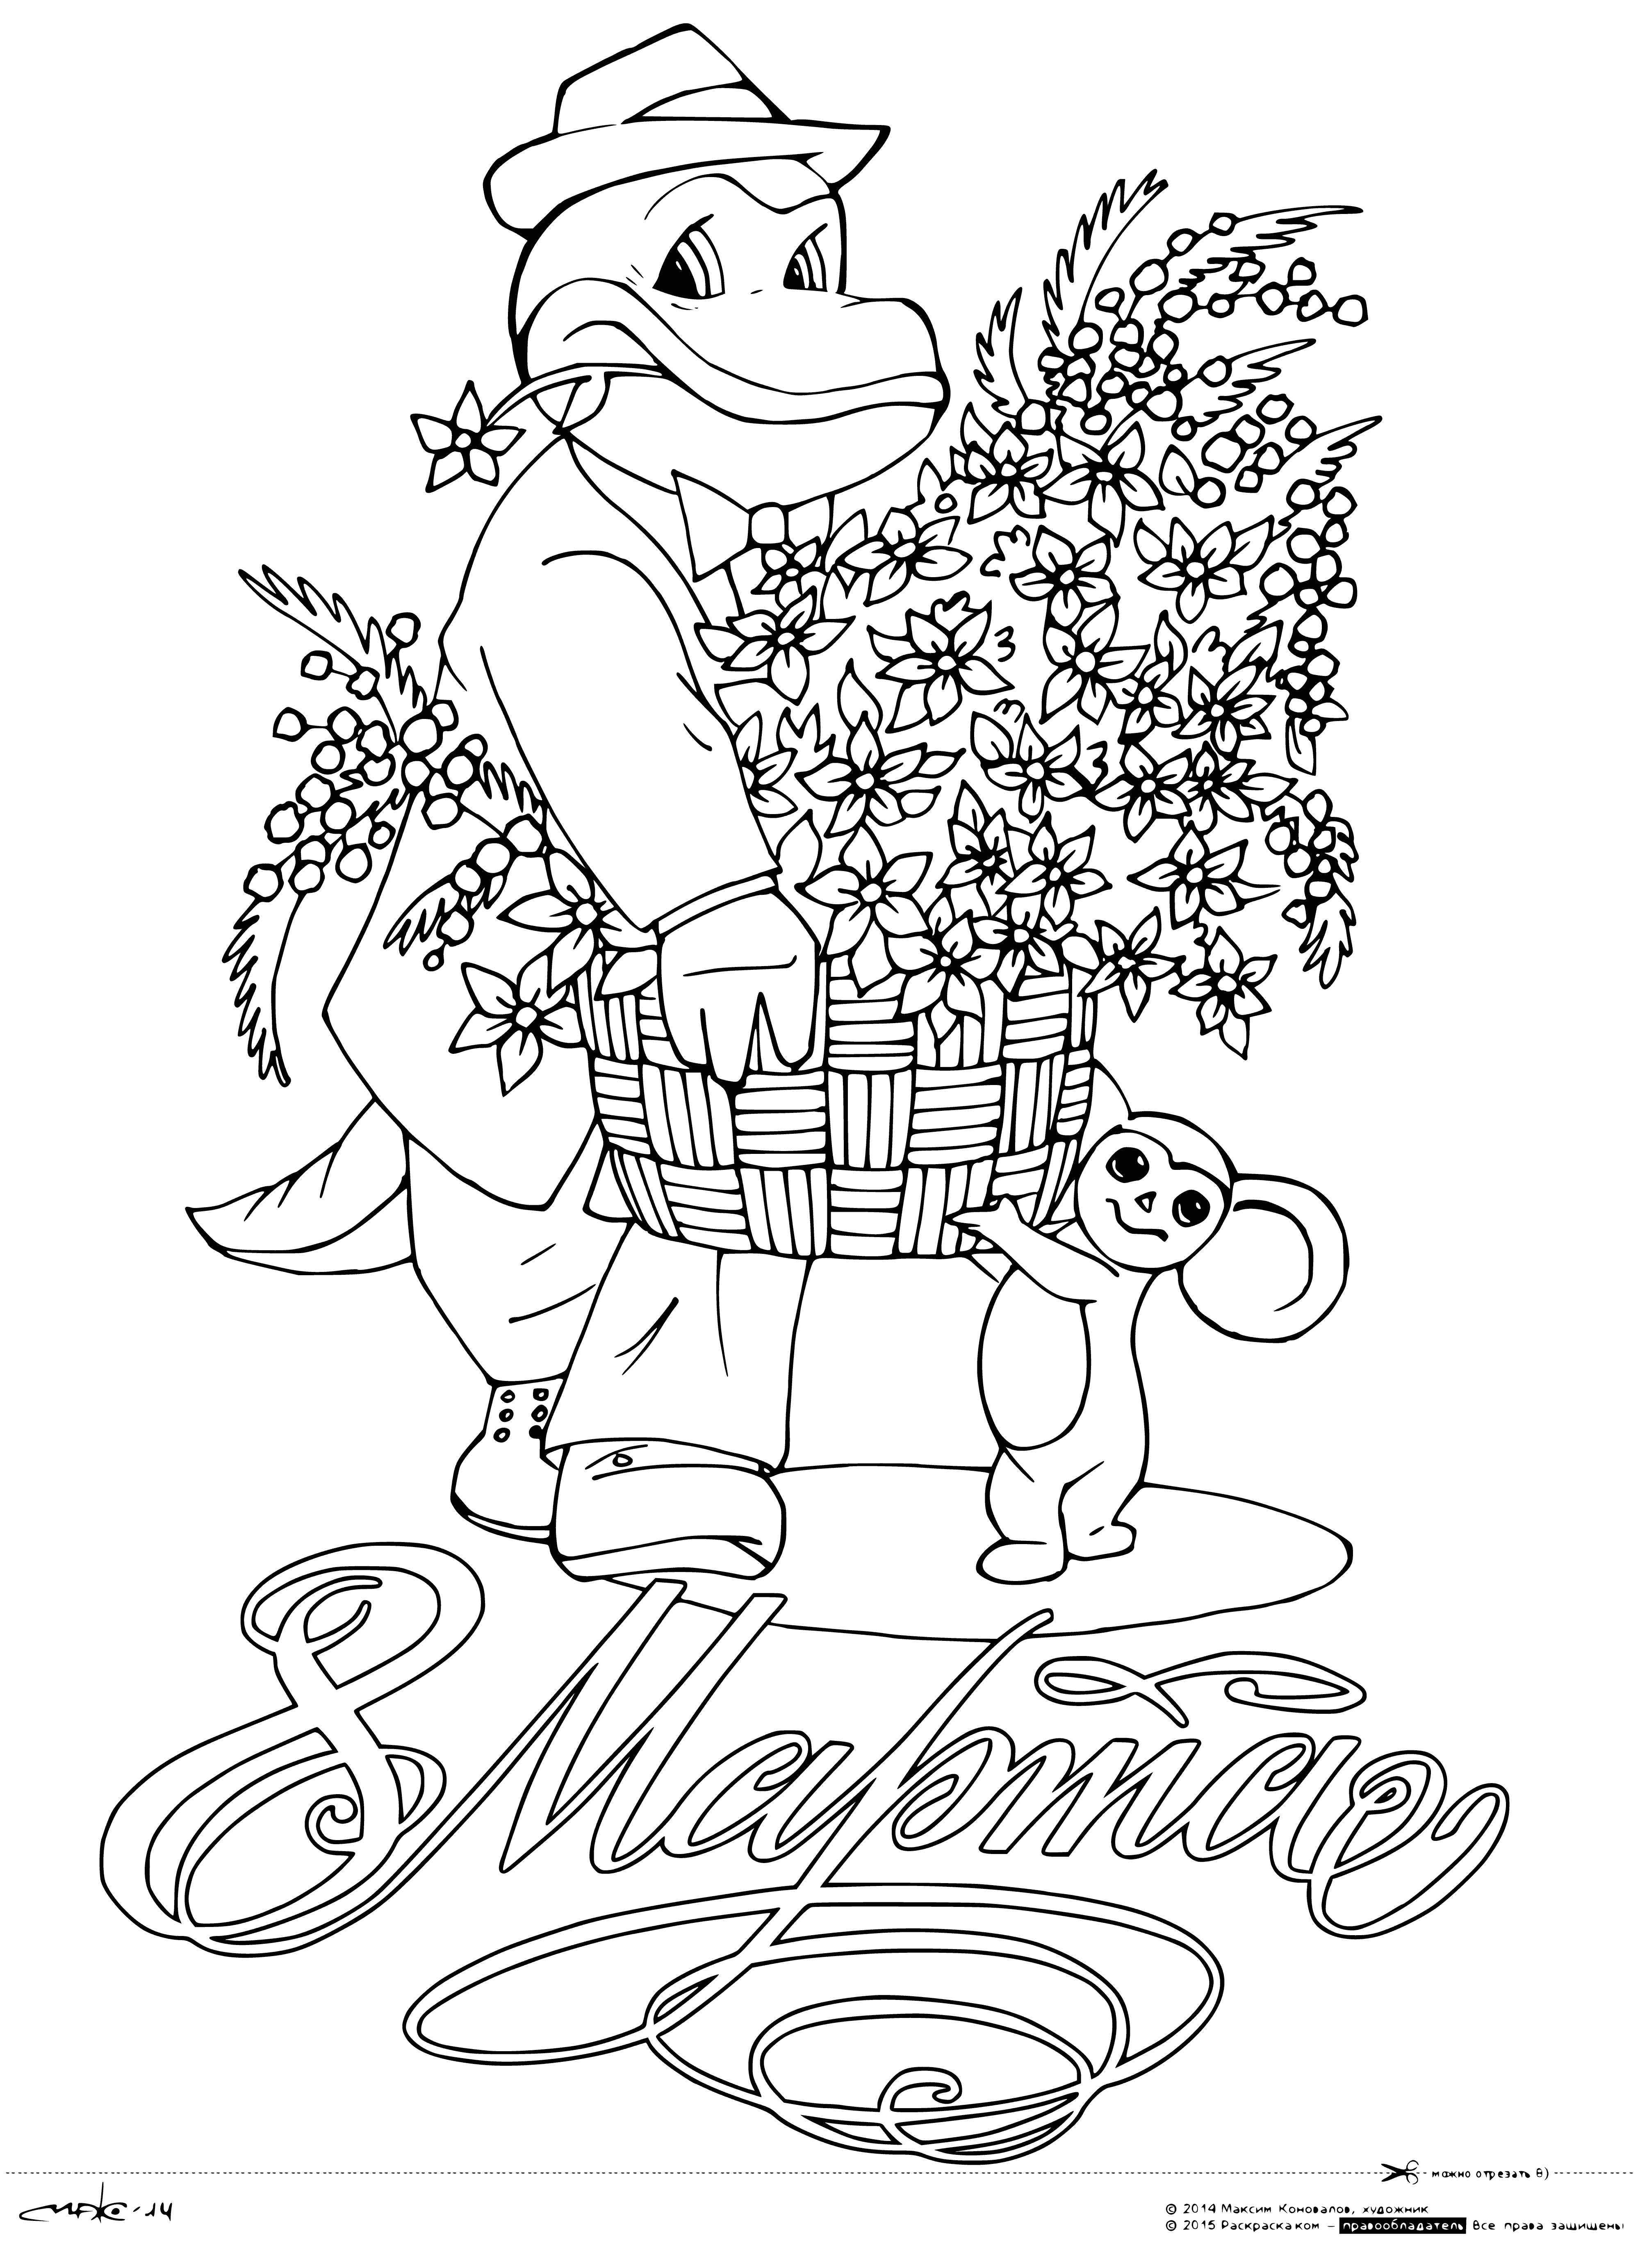 Gena and Cheburashka with a basket of flowers coloring page